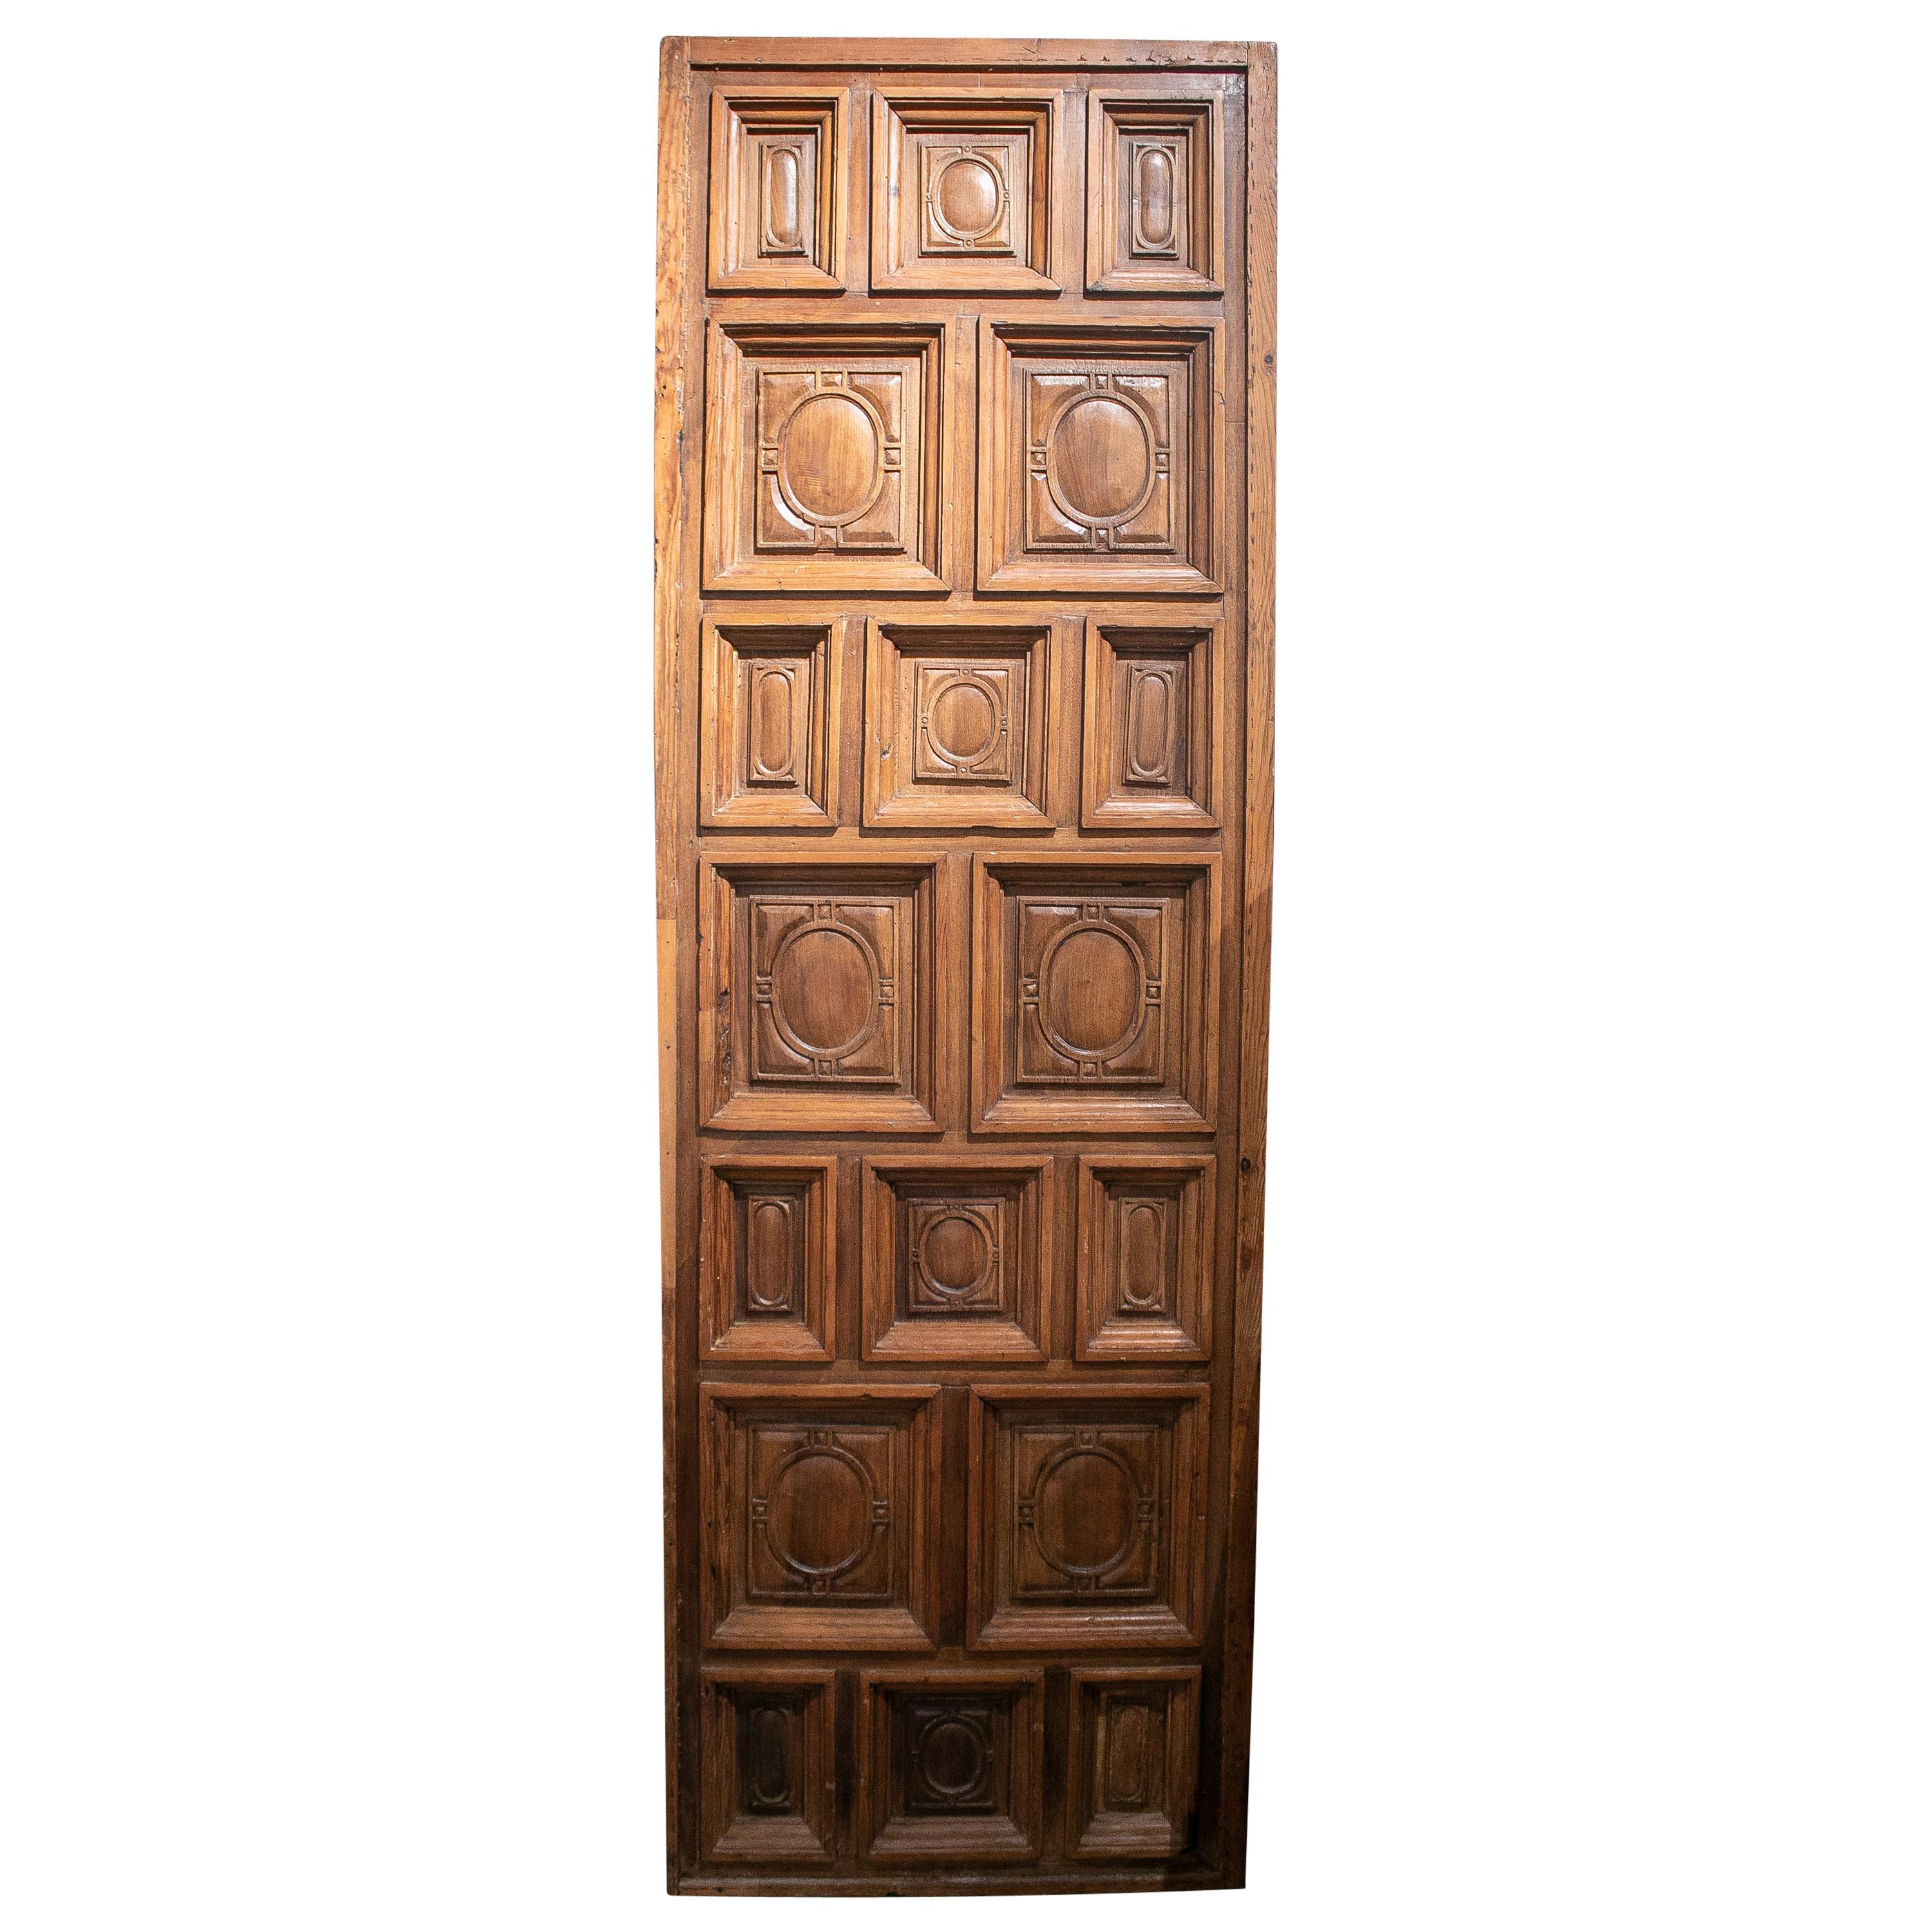 17th Century Spanish Geometric Panelled Hand Carved Wooden Door Panel